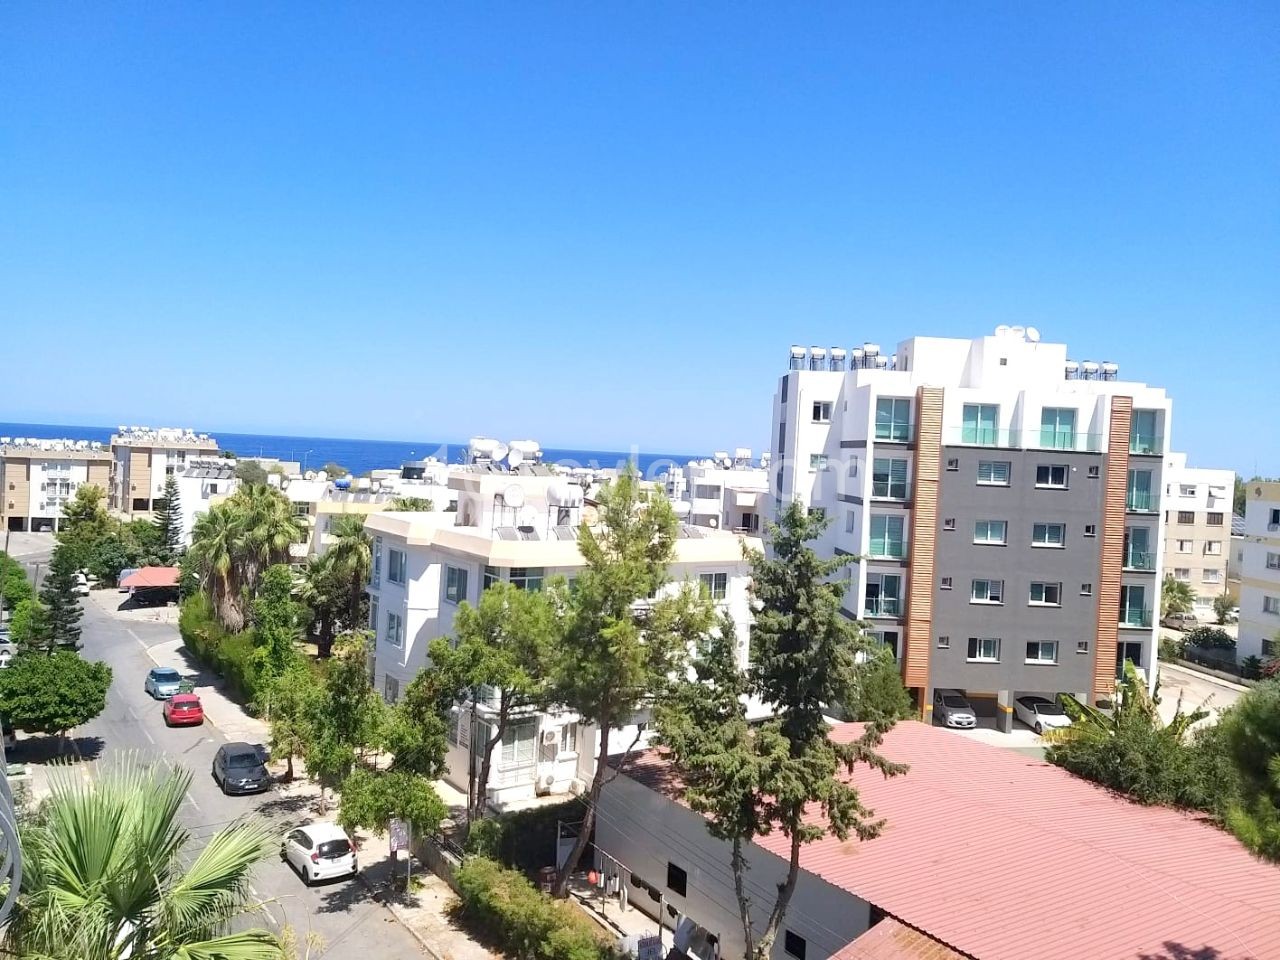 3 bedroom apartment in central of Kyrenia. Wlking distance to all amenities. Exchange title deed. No VAT. 05338403555